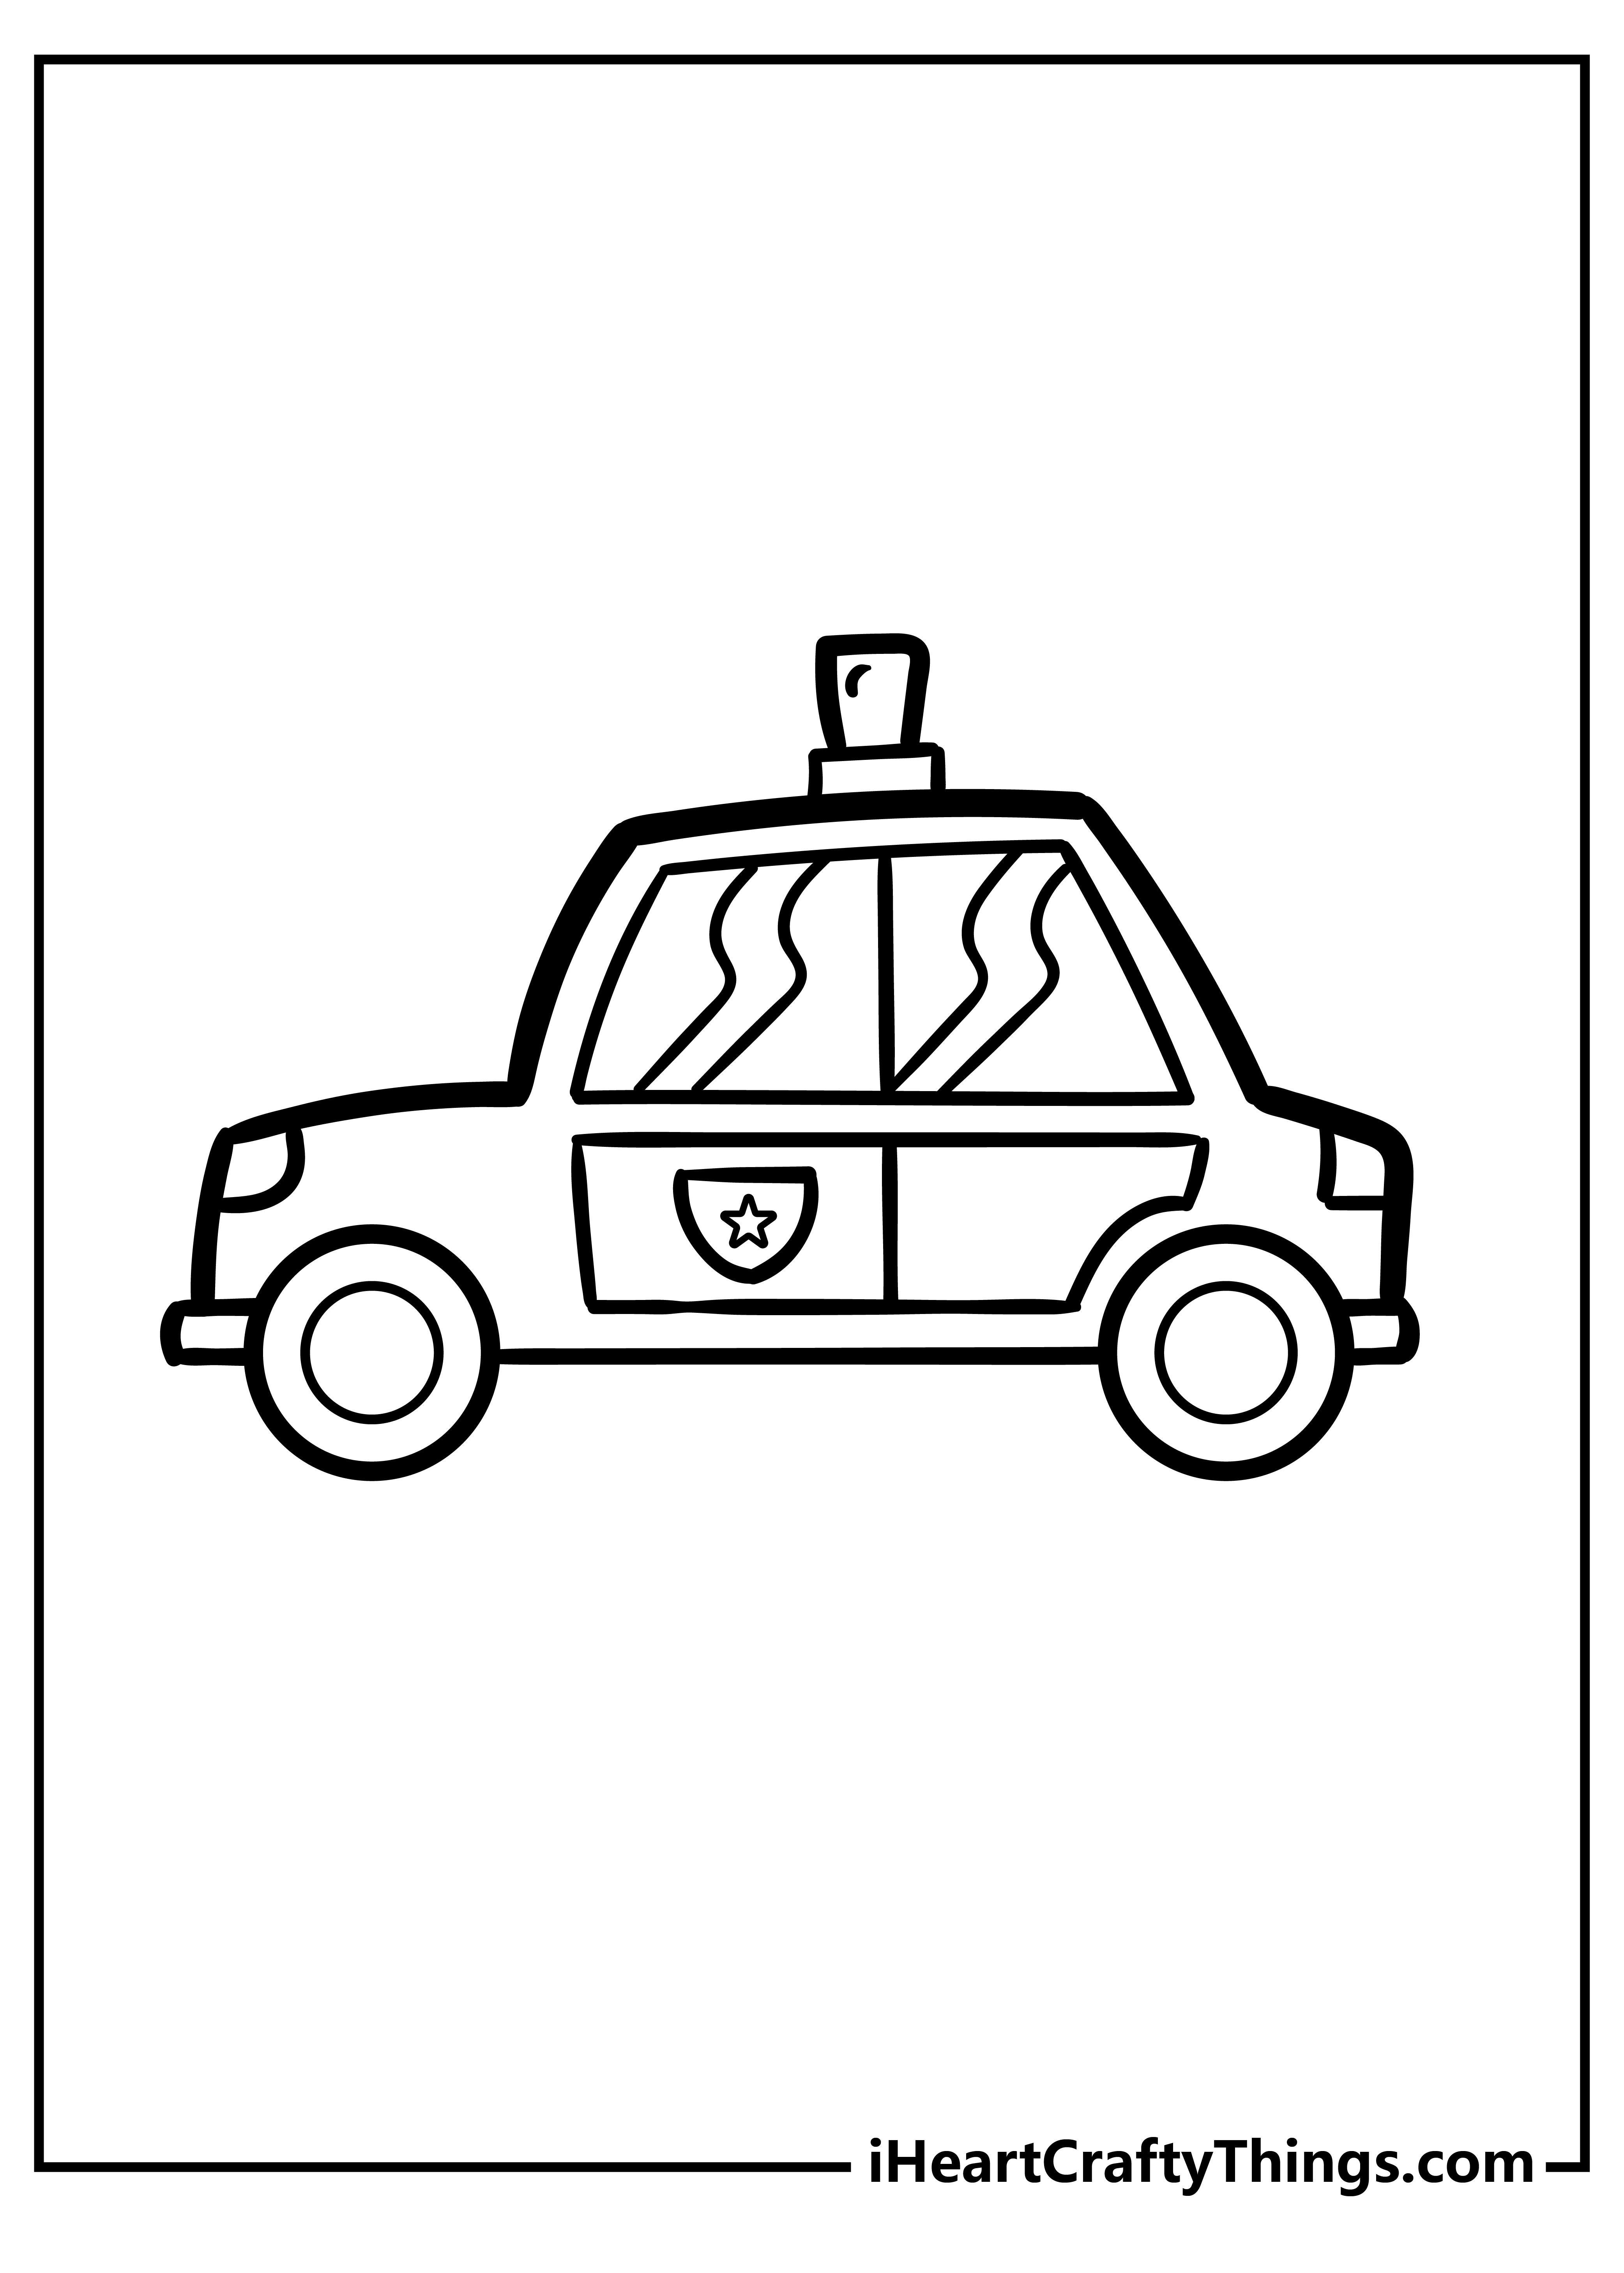 Police Car Coloring Pages free pdf download